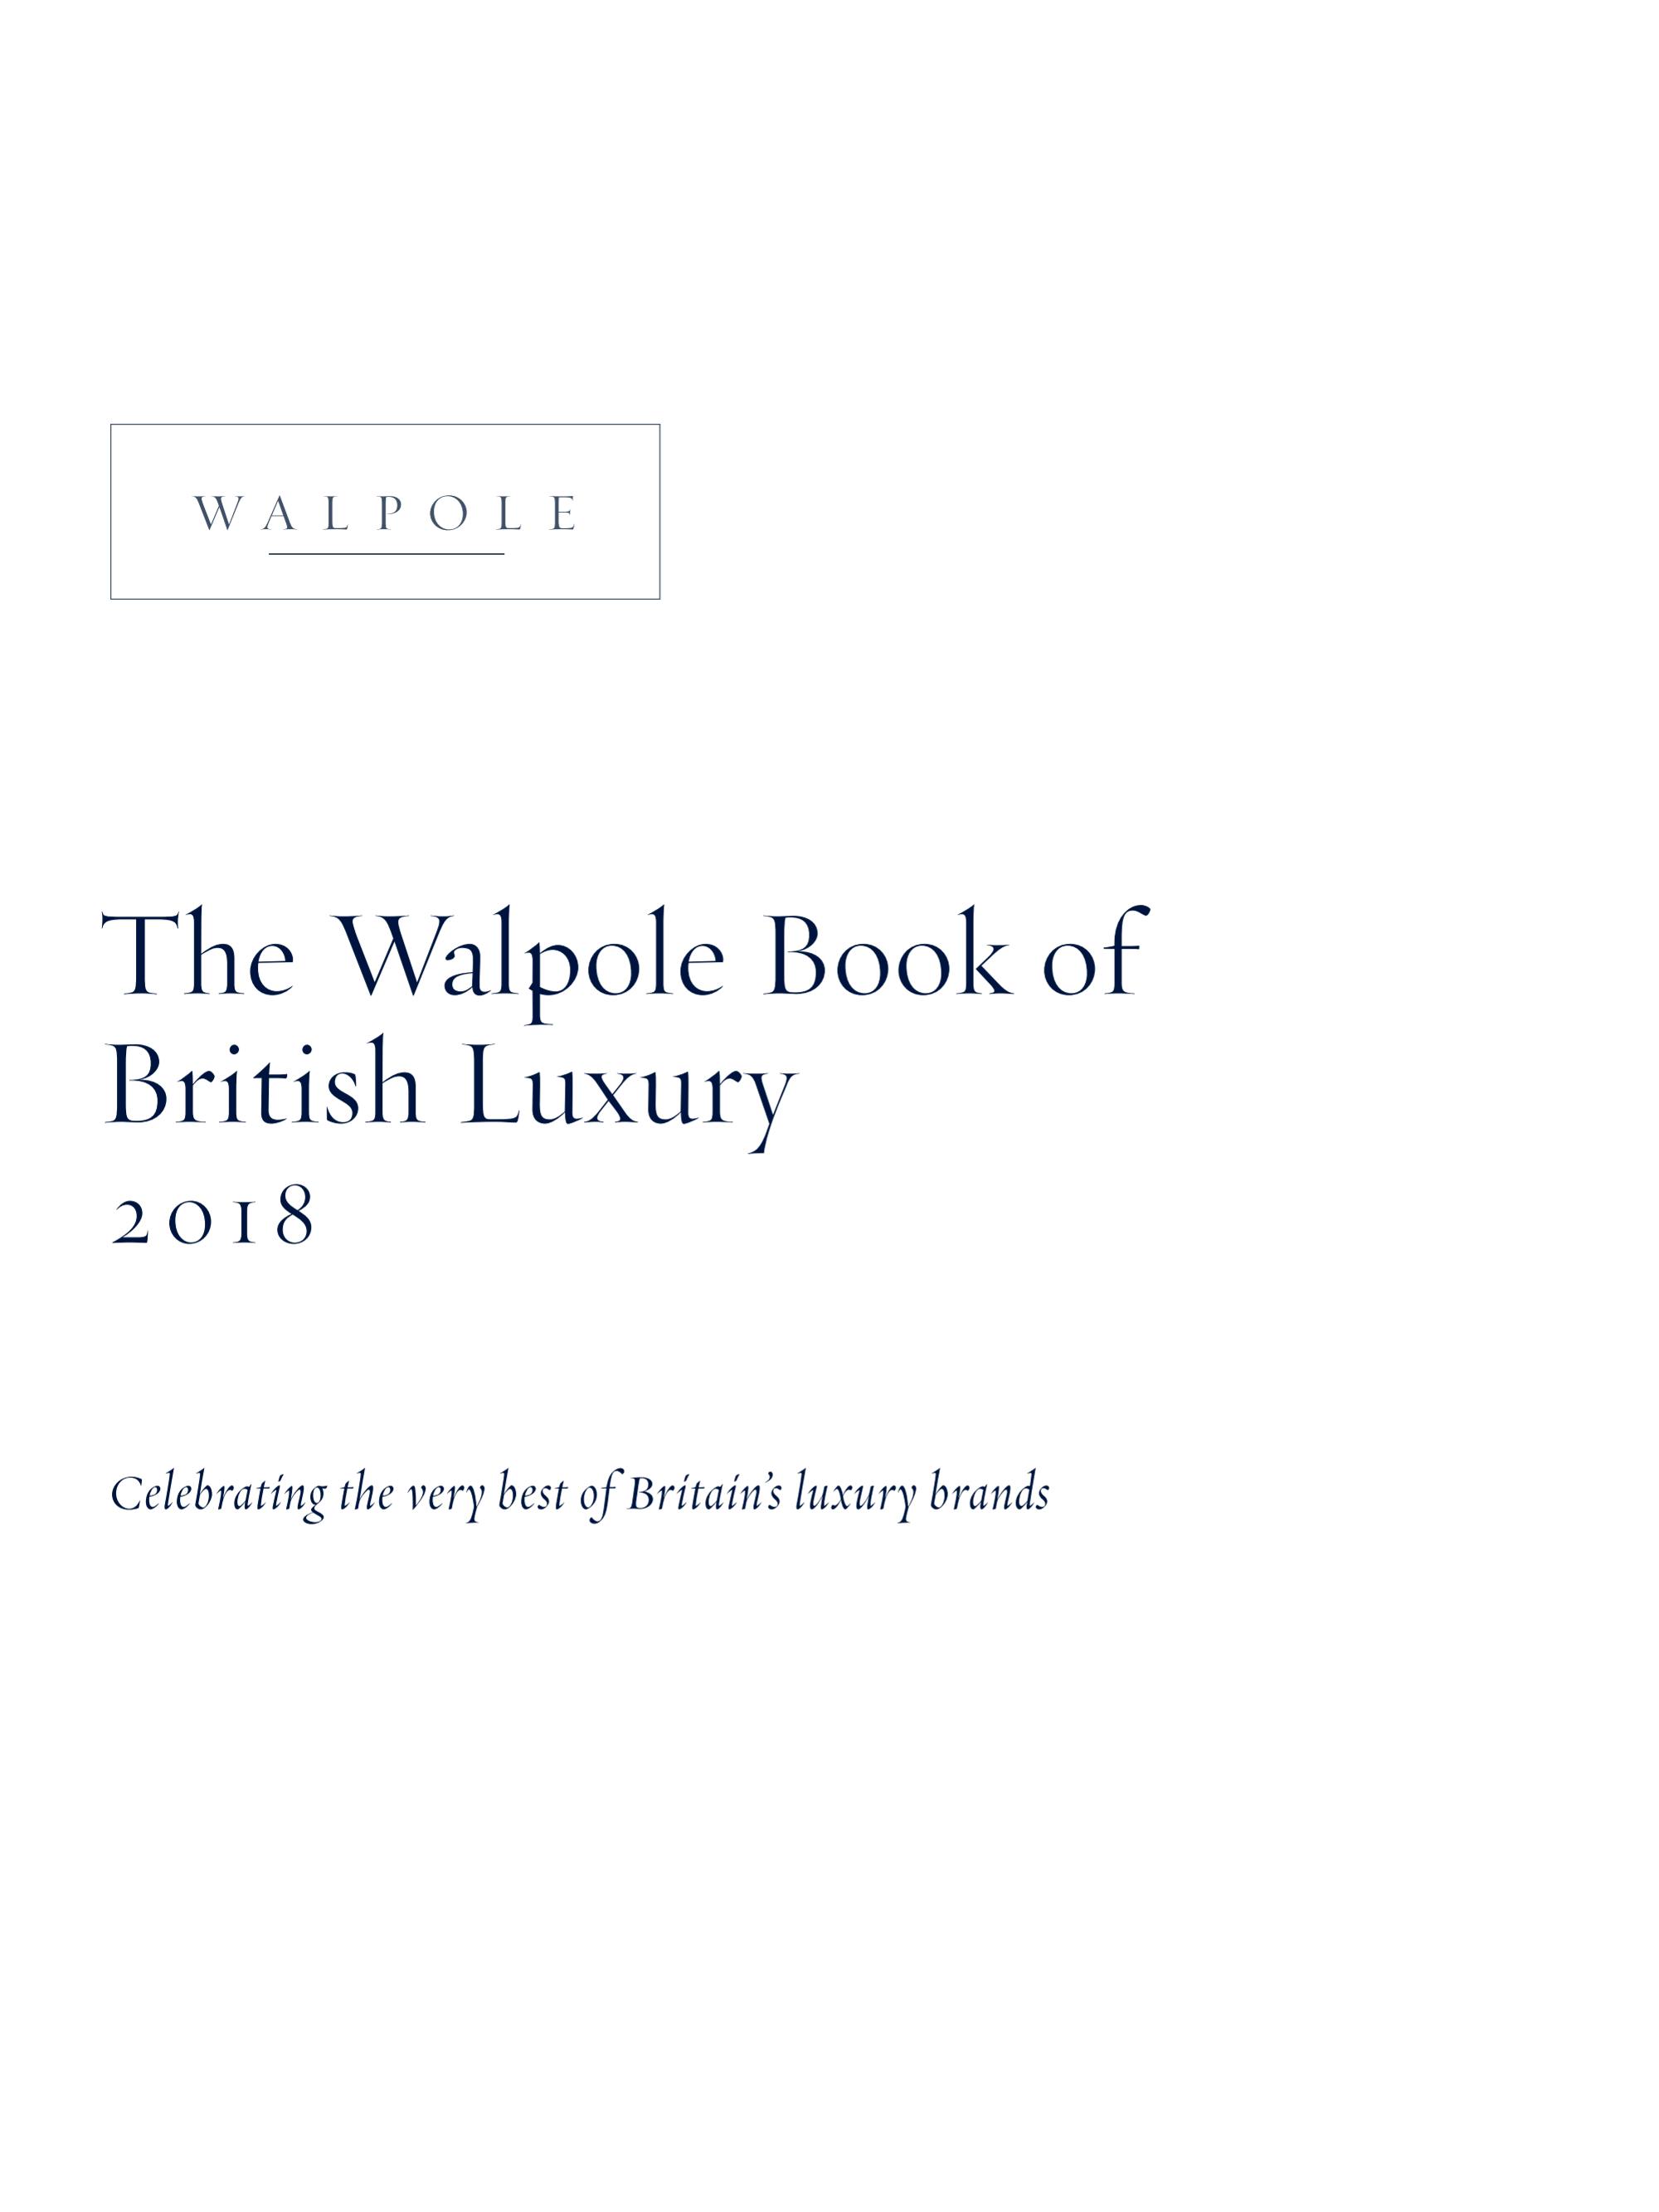 Your invitation to join the Walpole Book of Luxury  